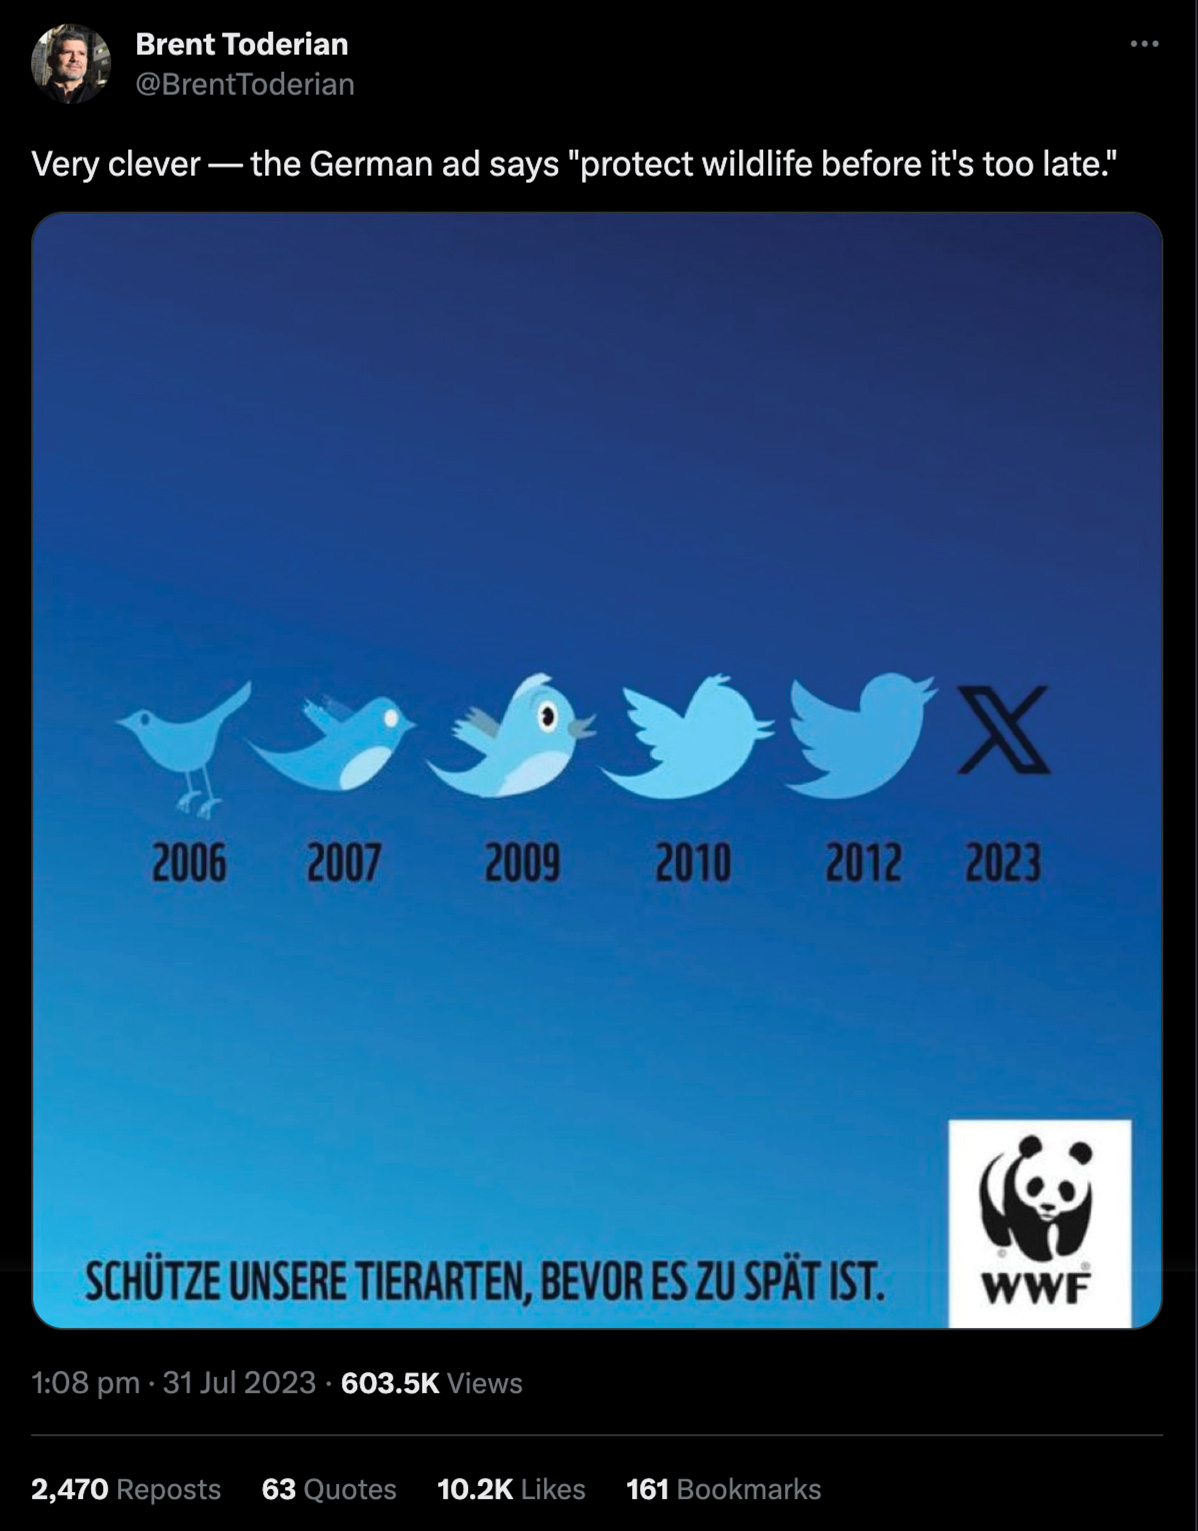 Tweet from @BrentToderian with the caption 'Very clever - the German ad says "protect wildlife before it's too late."' with an image of the evolution of the Twitter logo and the most recent logo being the new X